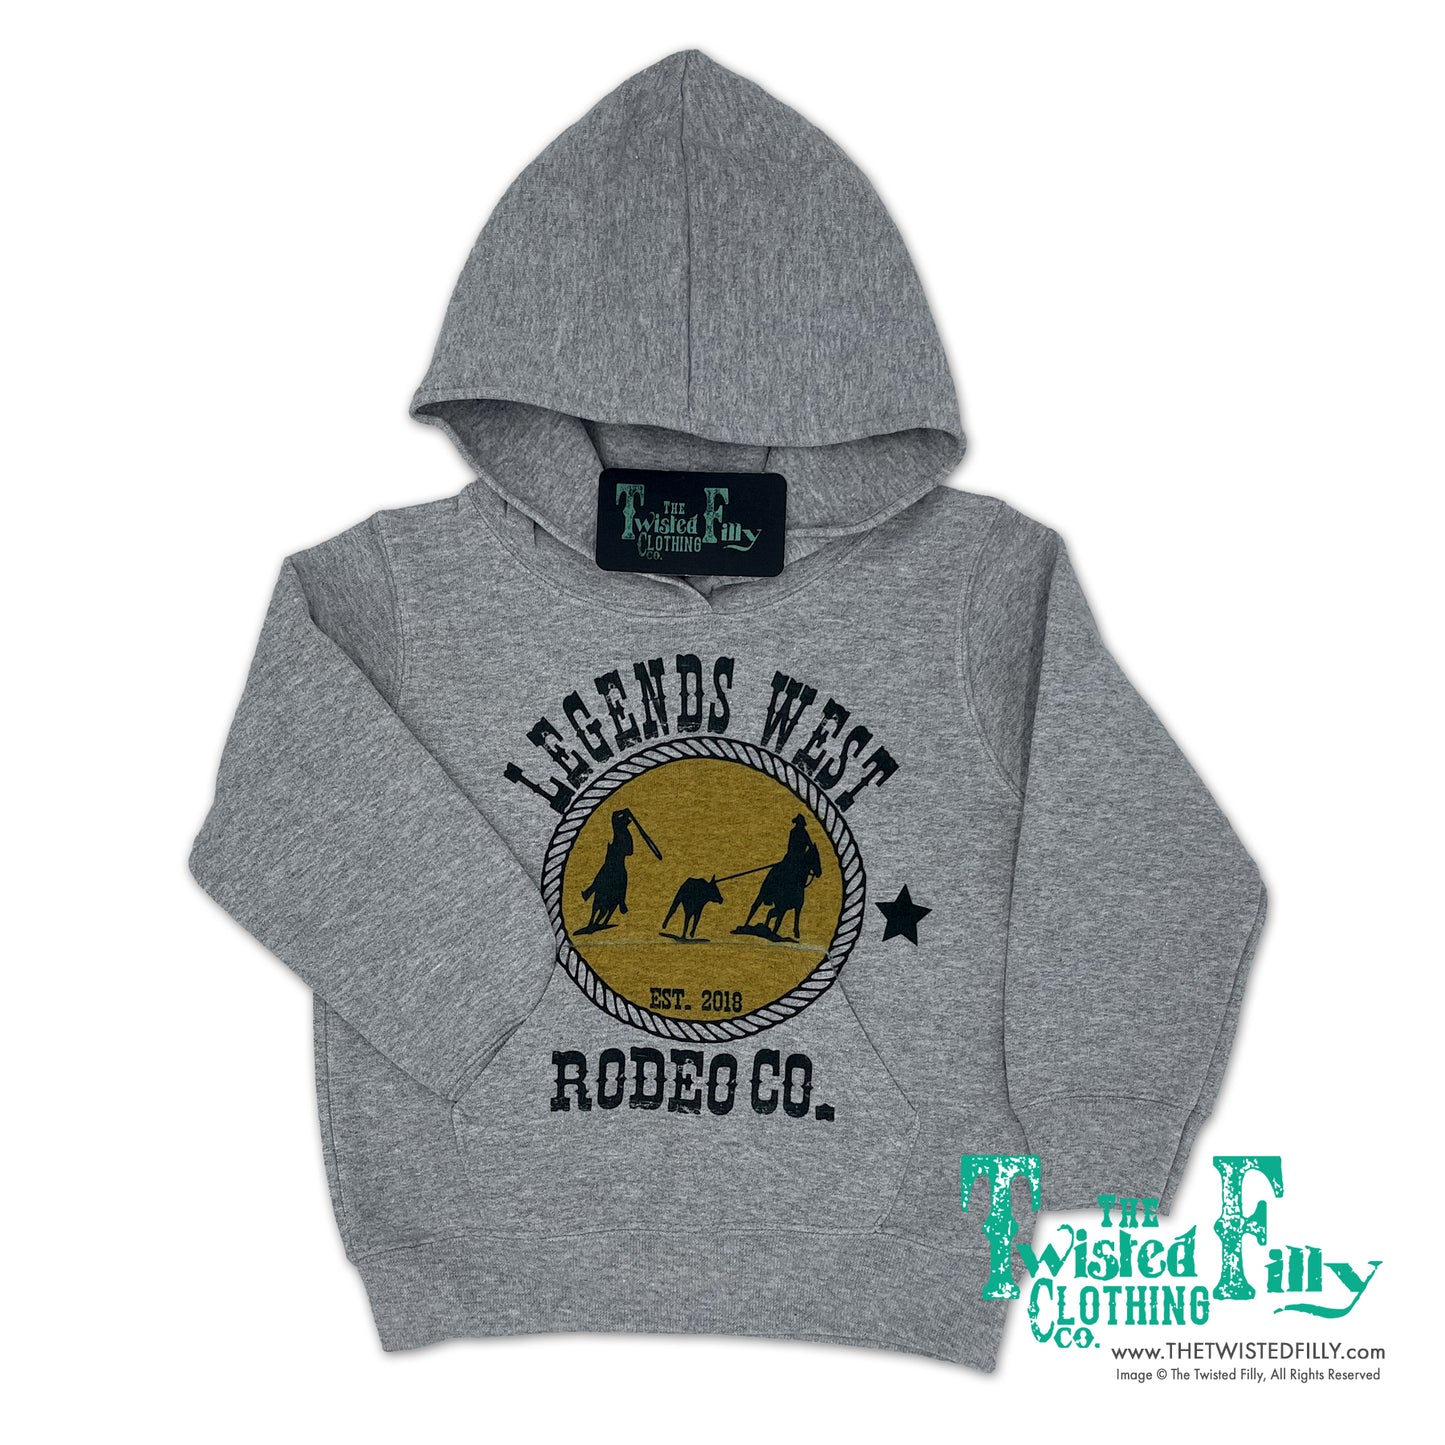 Legends West Rodeo Co. Team Roper - Youth Hoodie - Gray